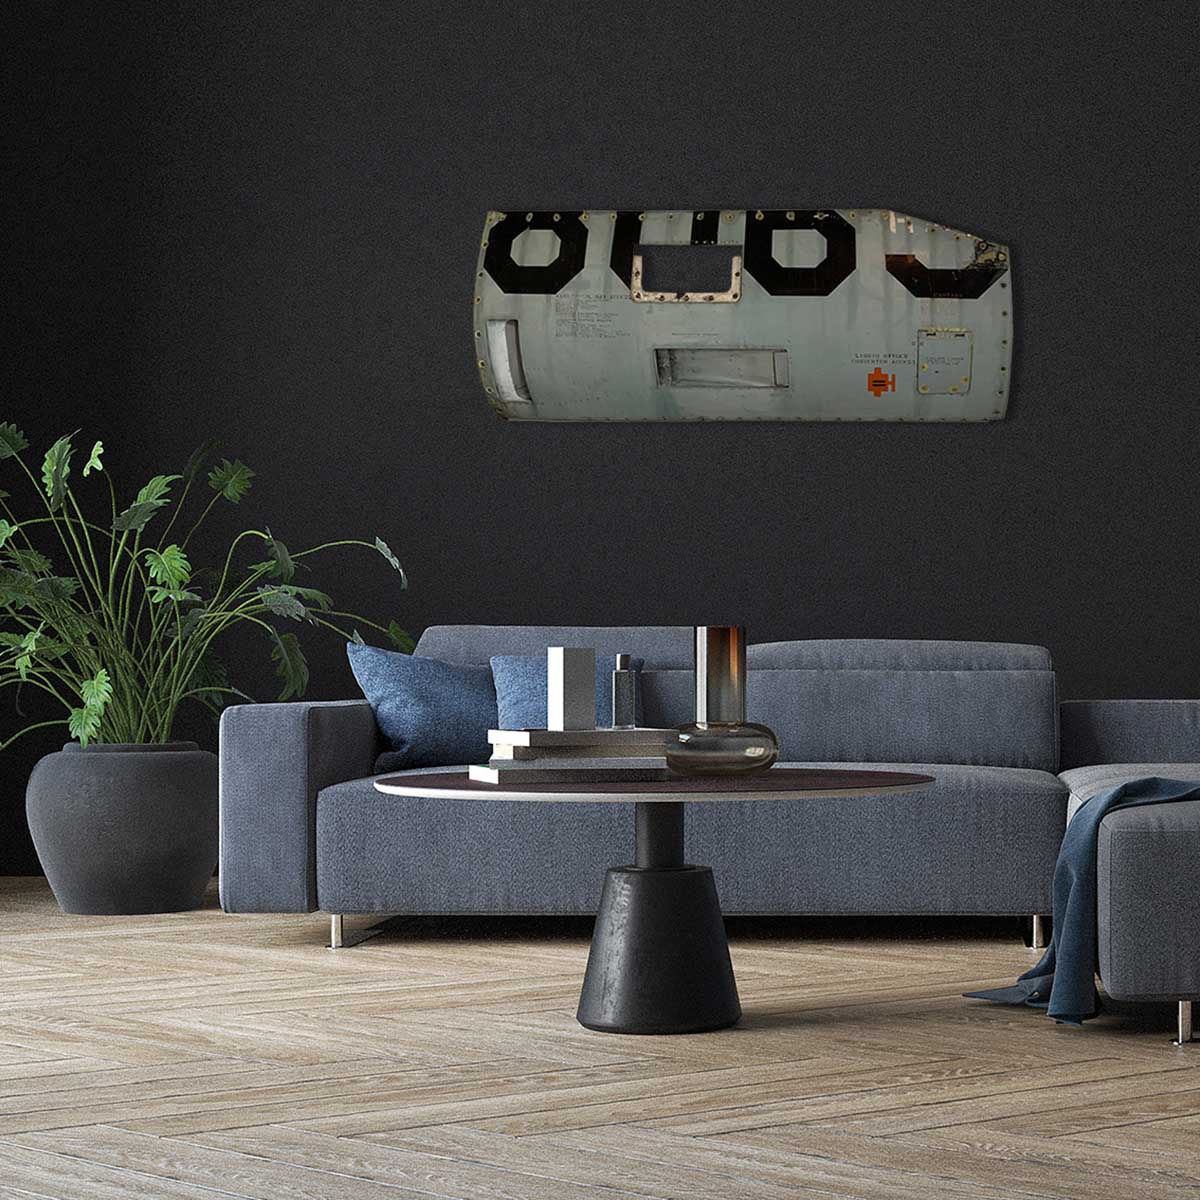 Royal Netherlands Air Force F-104G electrical bay access panel hanging on a wall in a modern living room.